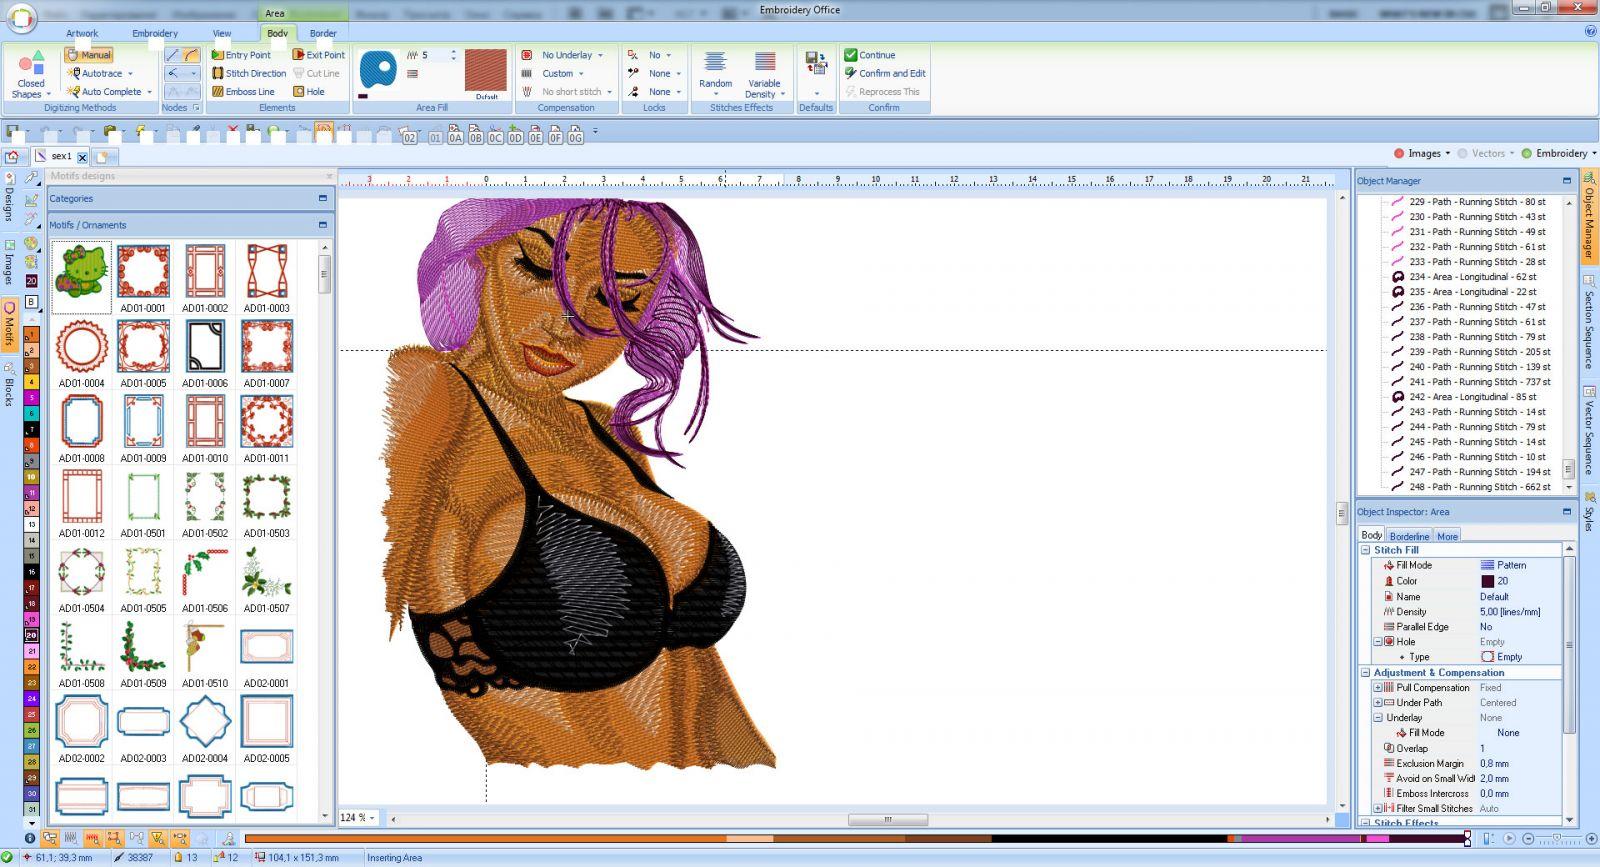 Sexy lady in Sierra Embroidery software